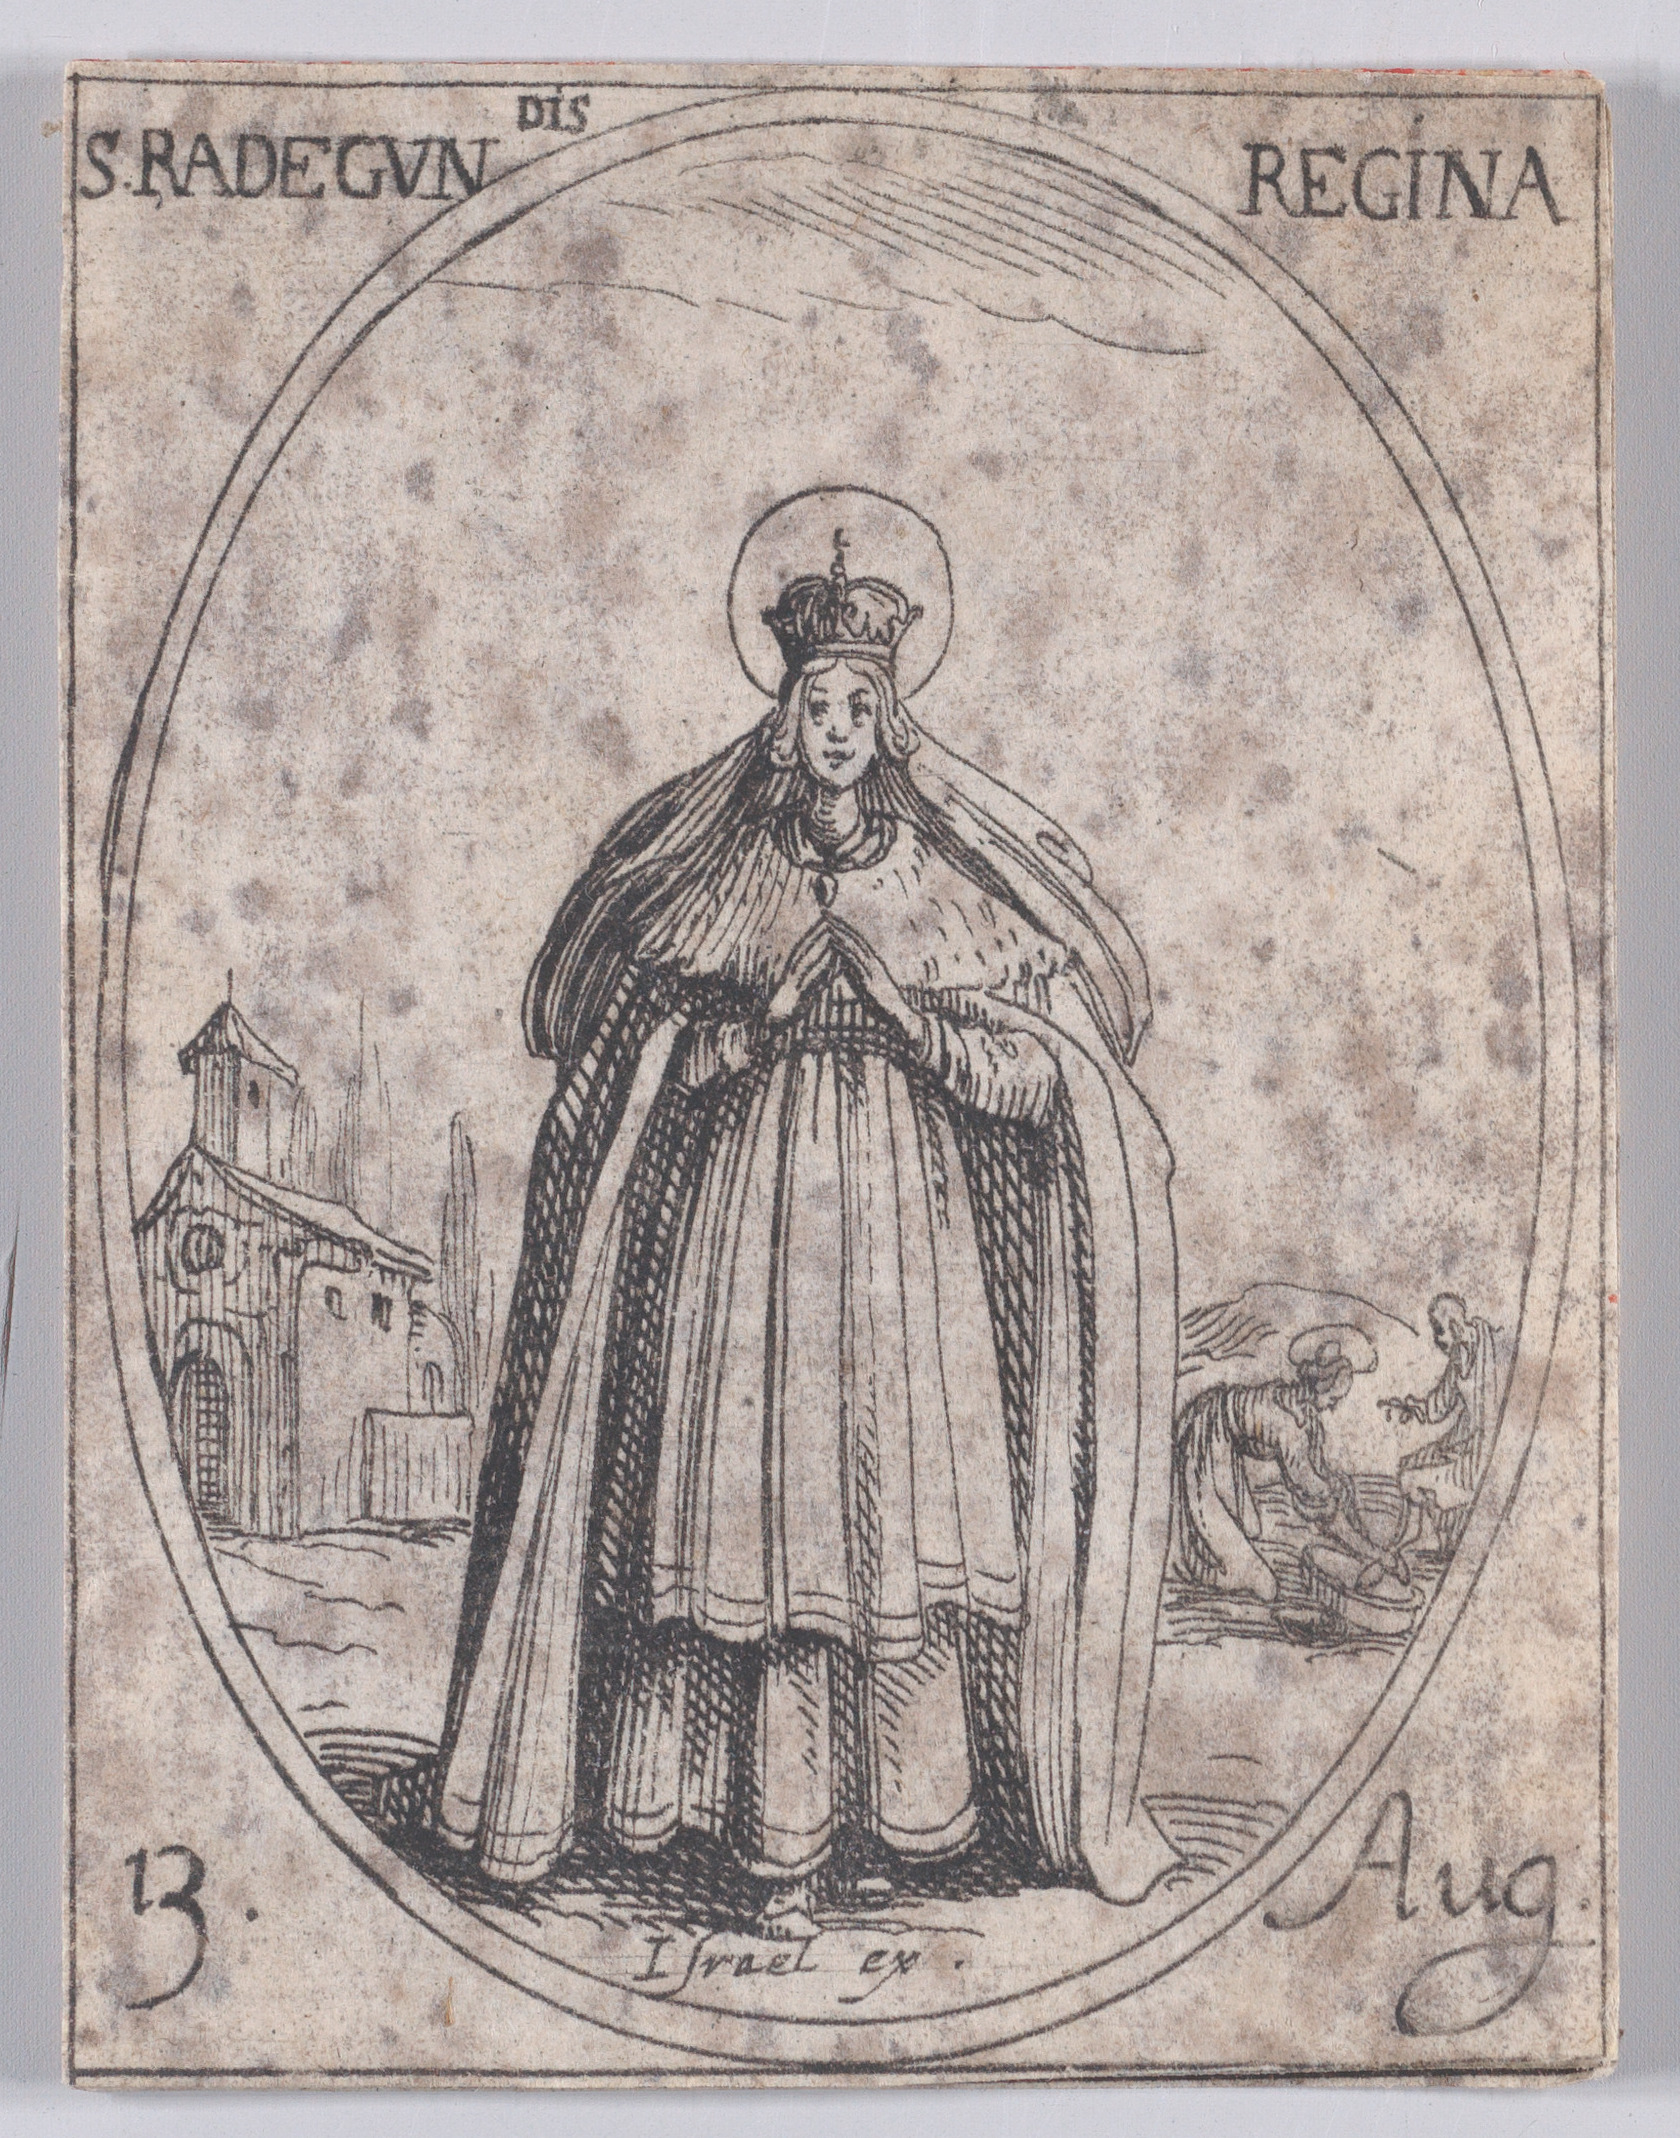 Ste. Radegonde, reine (St. Radagund, Queen), August 13th, from Les Images De Tous Les Saincts et Saintes de L'Année (Images of All of the Saints and Religious Events of the Year), Jacques Callot (French, Nancy 1592–1635 Nancy), Etching; second state of two (Lieure)